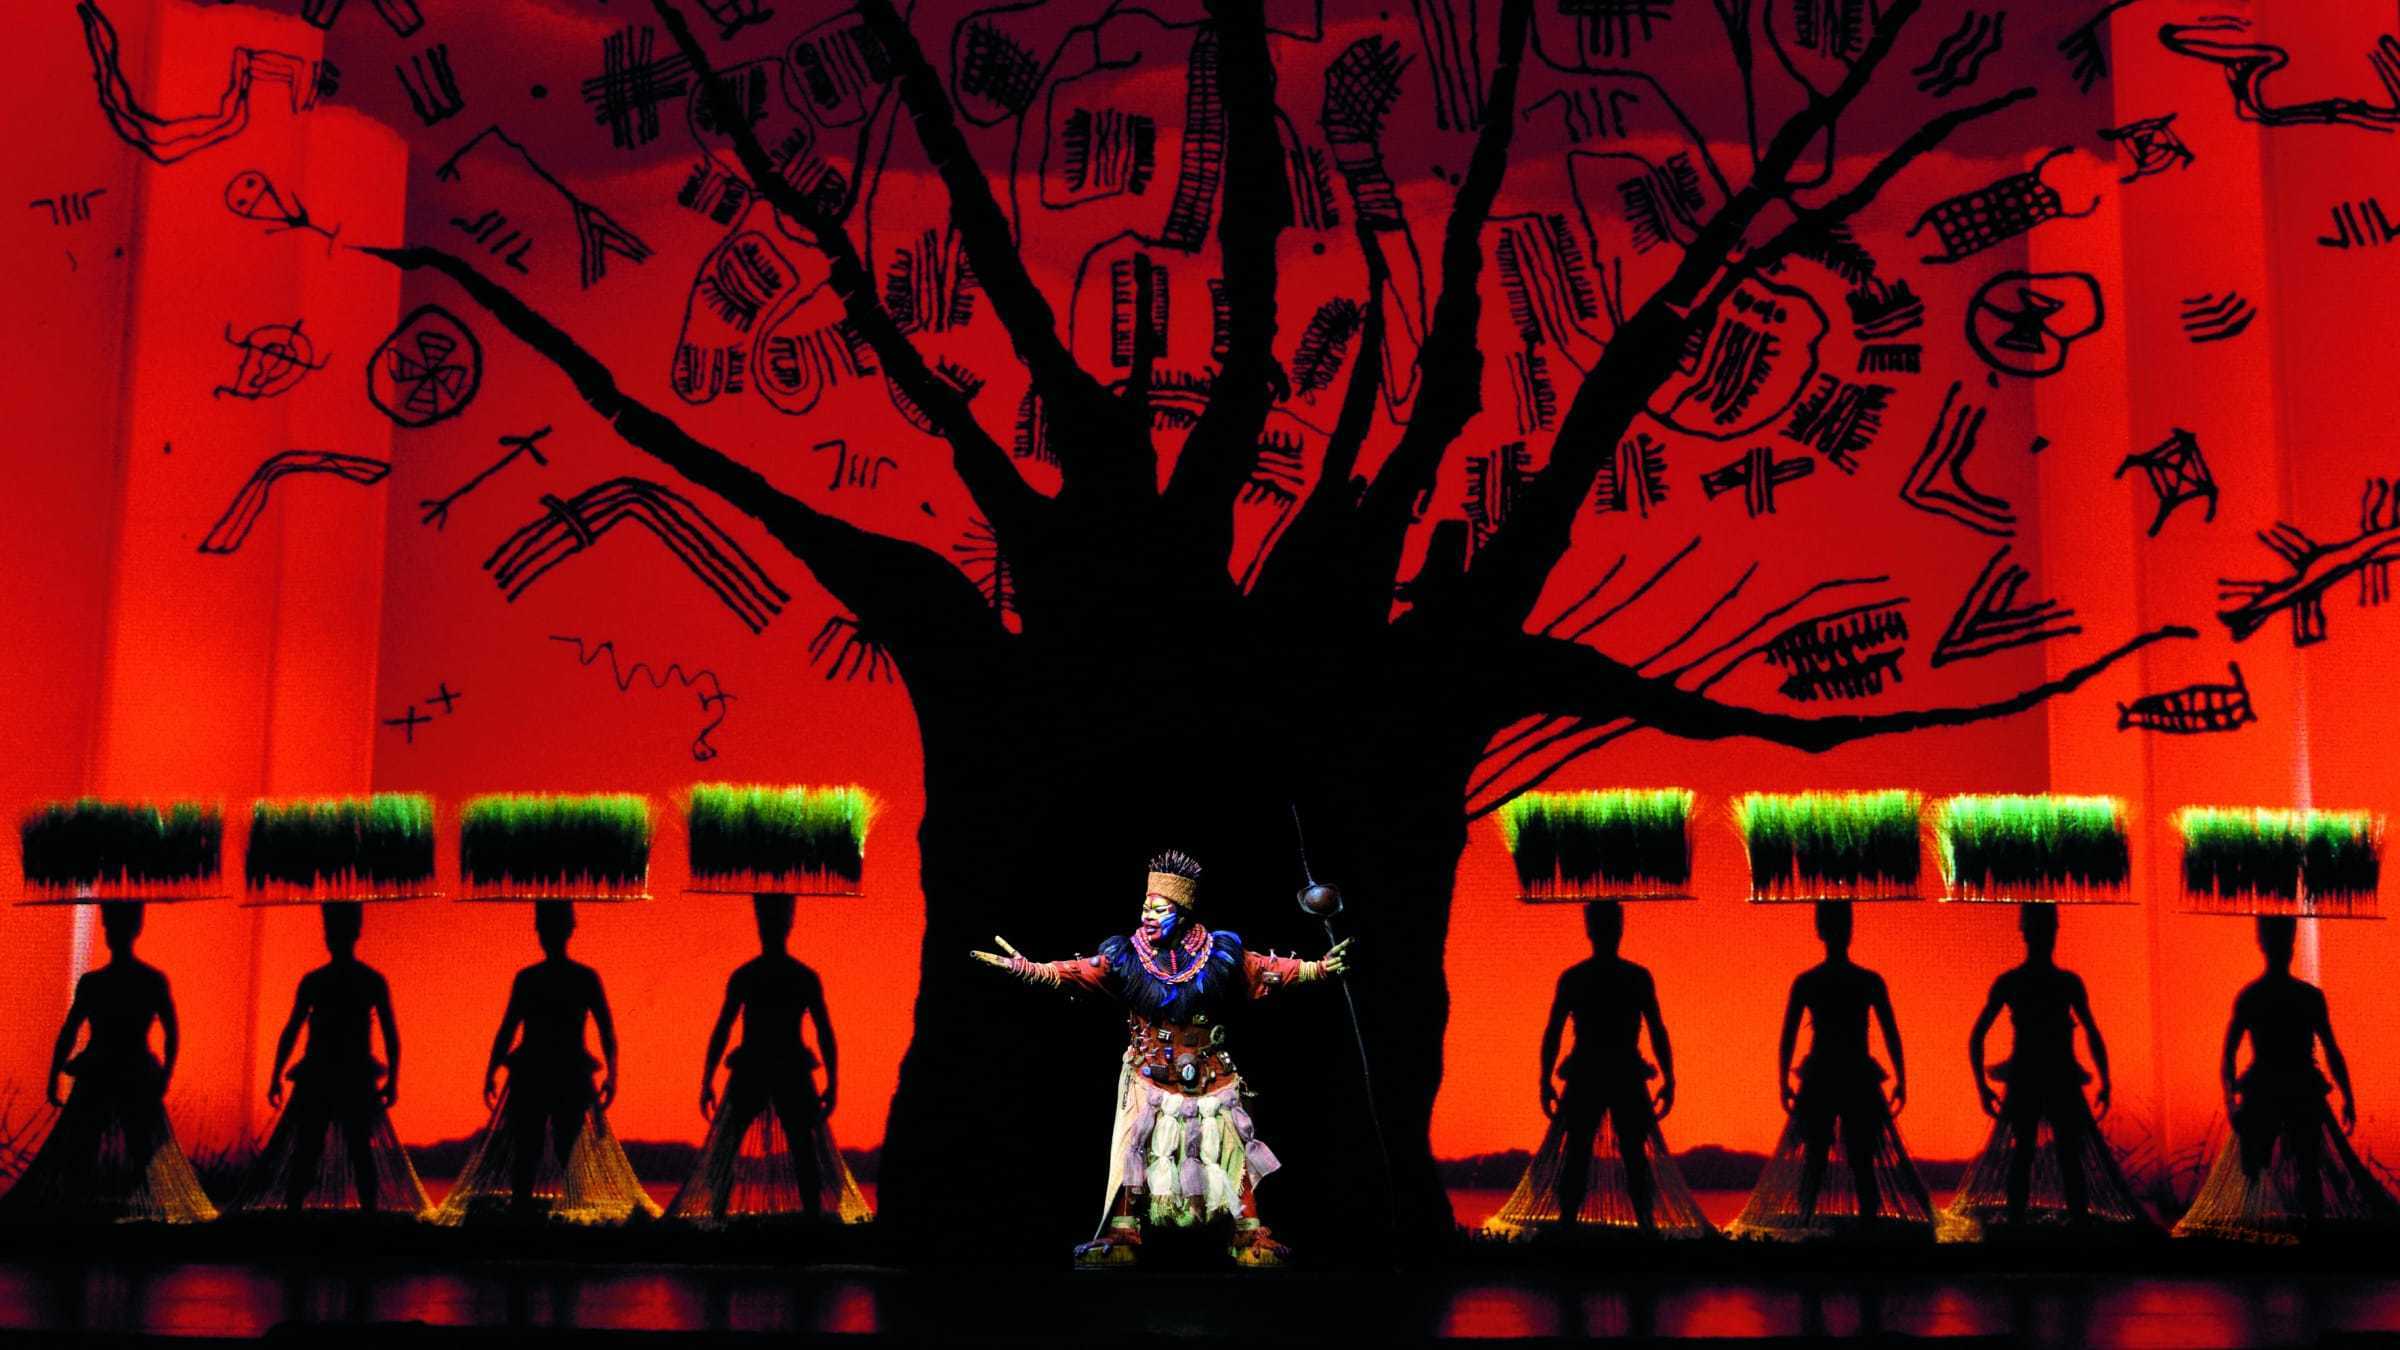 Rafiki character in costume on stage with cast members depicting grass in the background. 